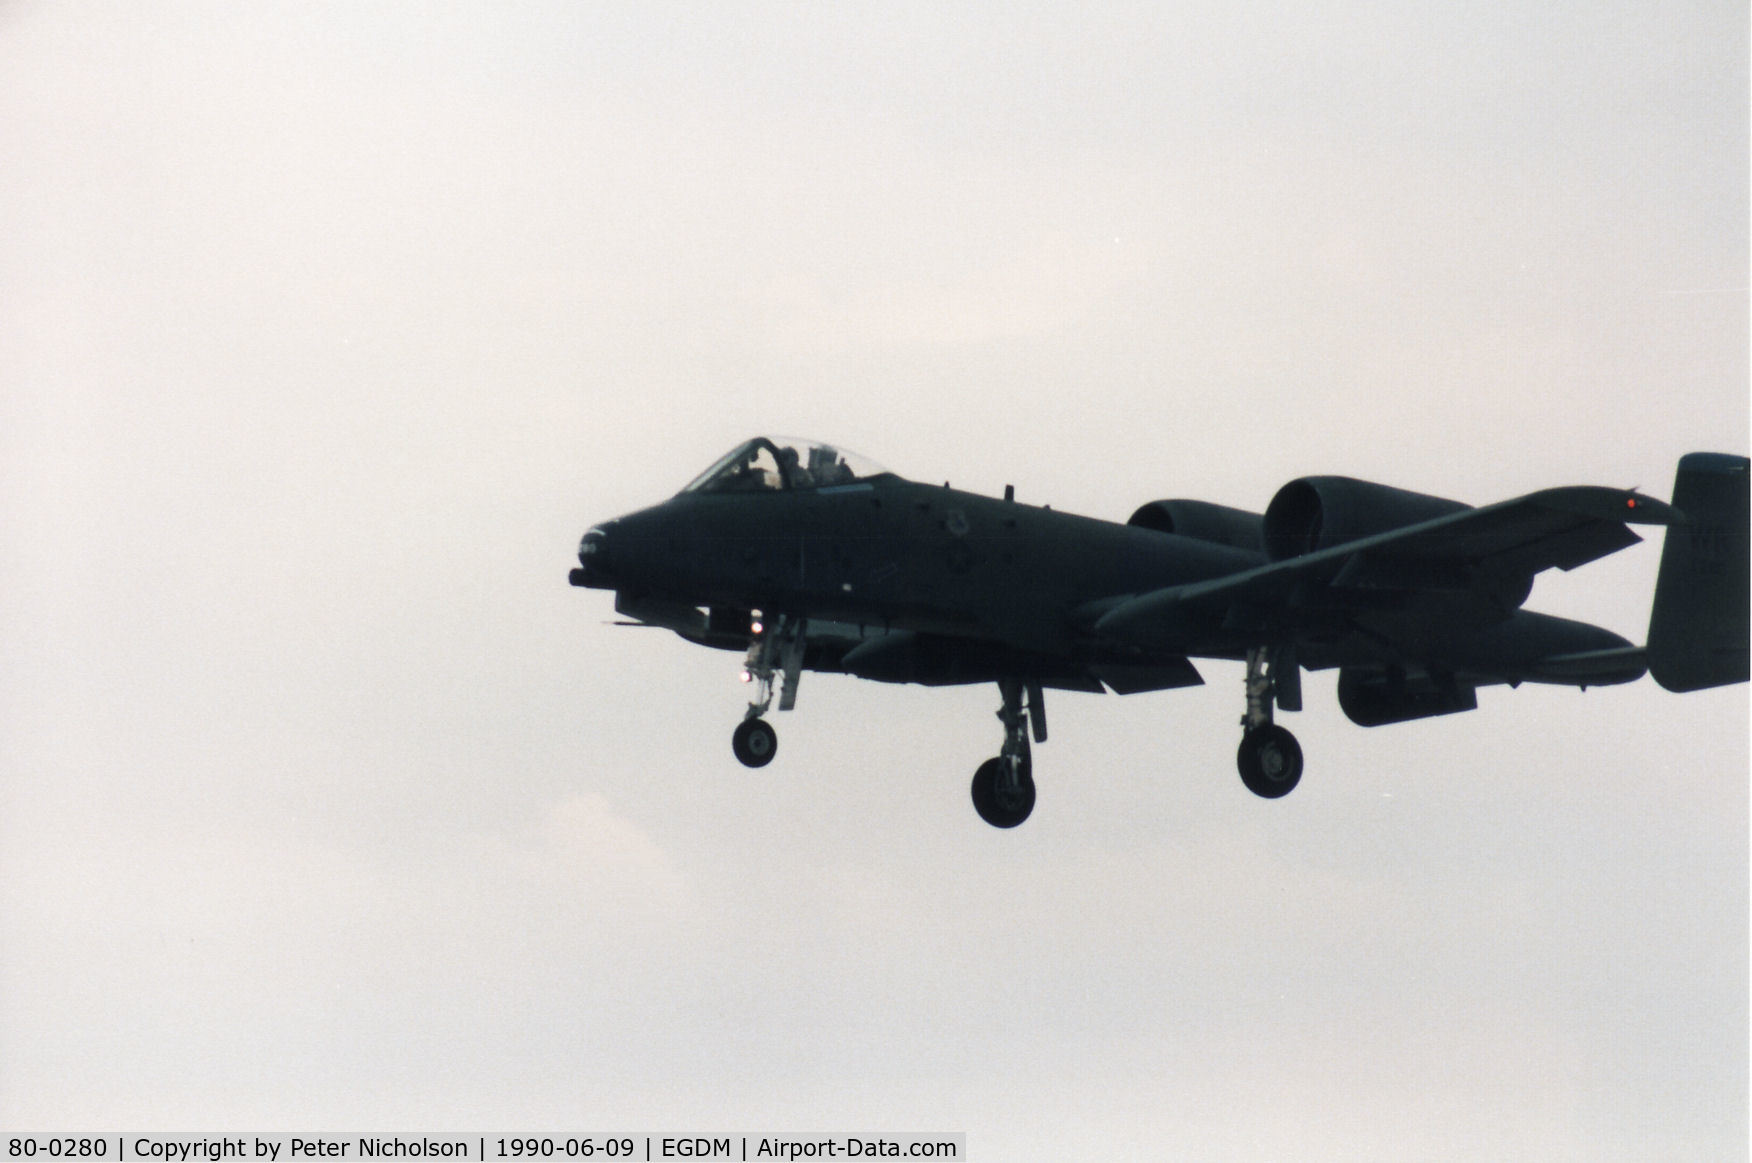 80-0280, 1980 Fairchild Republic A-10A Thunderbolt II C/N A10-0630, A-10A Thunderbolt, callsign Bison 34, of 91st Tactical Fighter Squadron/81st Tactical Fighter Wing landing at the 1990 Boscombe Down Battle of Britain 50th Anniversary Airshow.